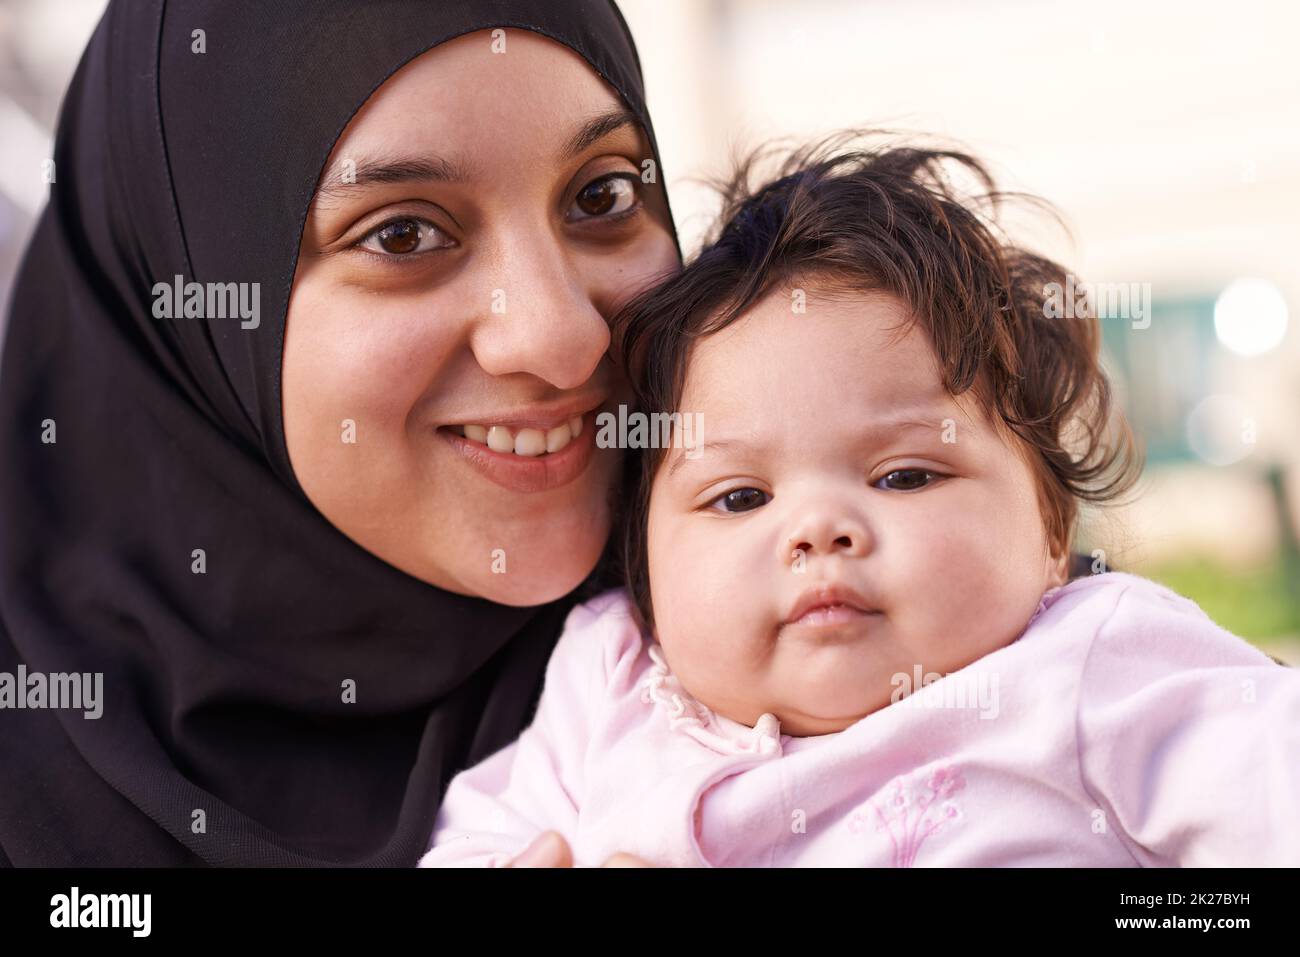 Moms little love. a muslim mother and her little baby girl. Stock Photo